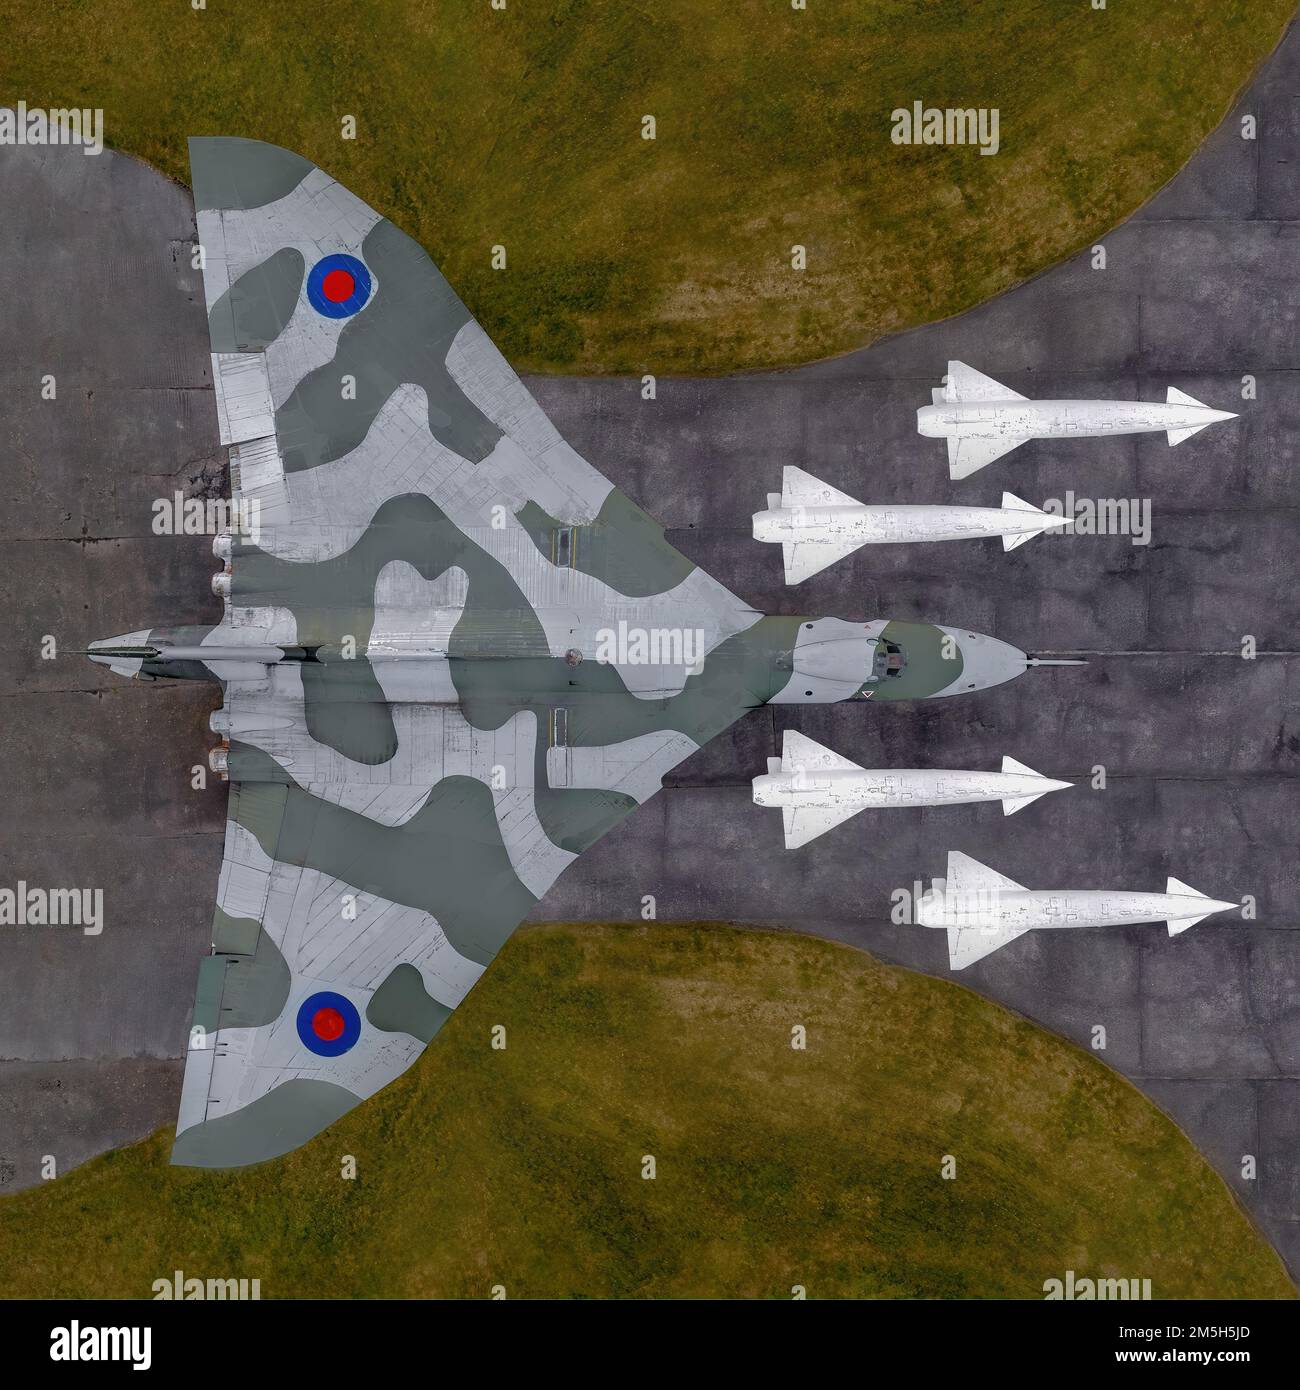 Avro Vulcan Nuclear Bomber Aircraft from the cold war with blue steel bombs. Aerial view of the bomber showing the large delta wing Stock Photo